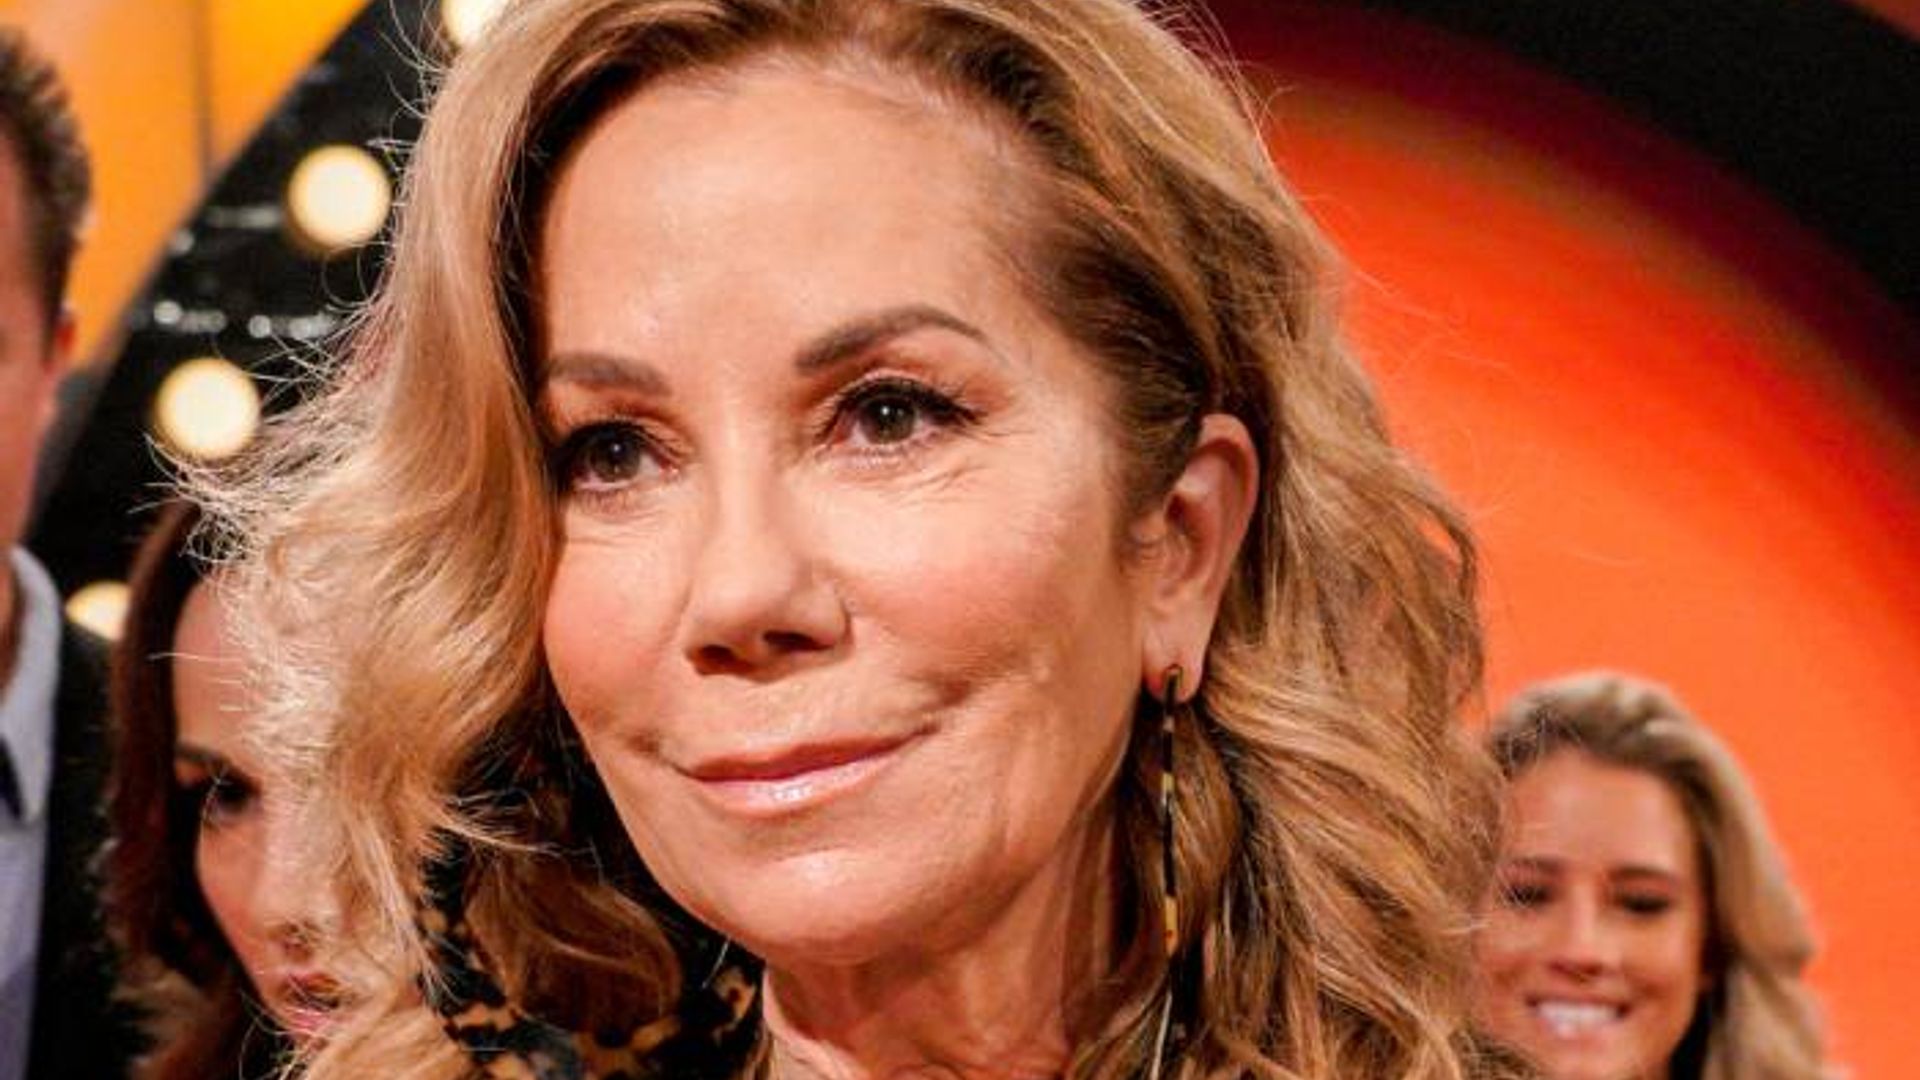 Former Today S Kathie Lee Ford Asks For Help In Emotional Message Close To Heart Fans Send